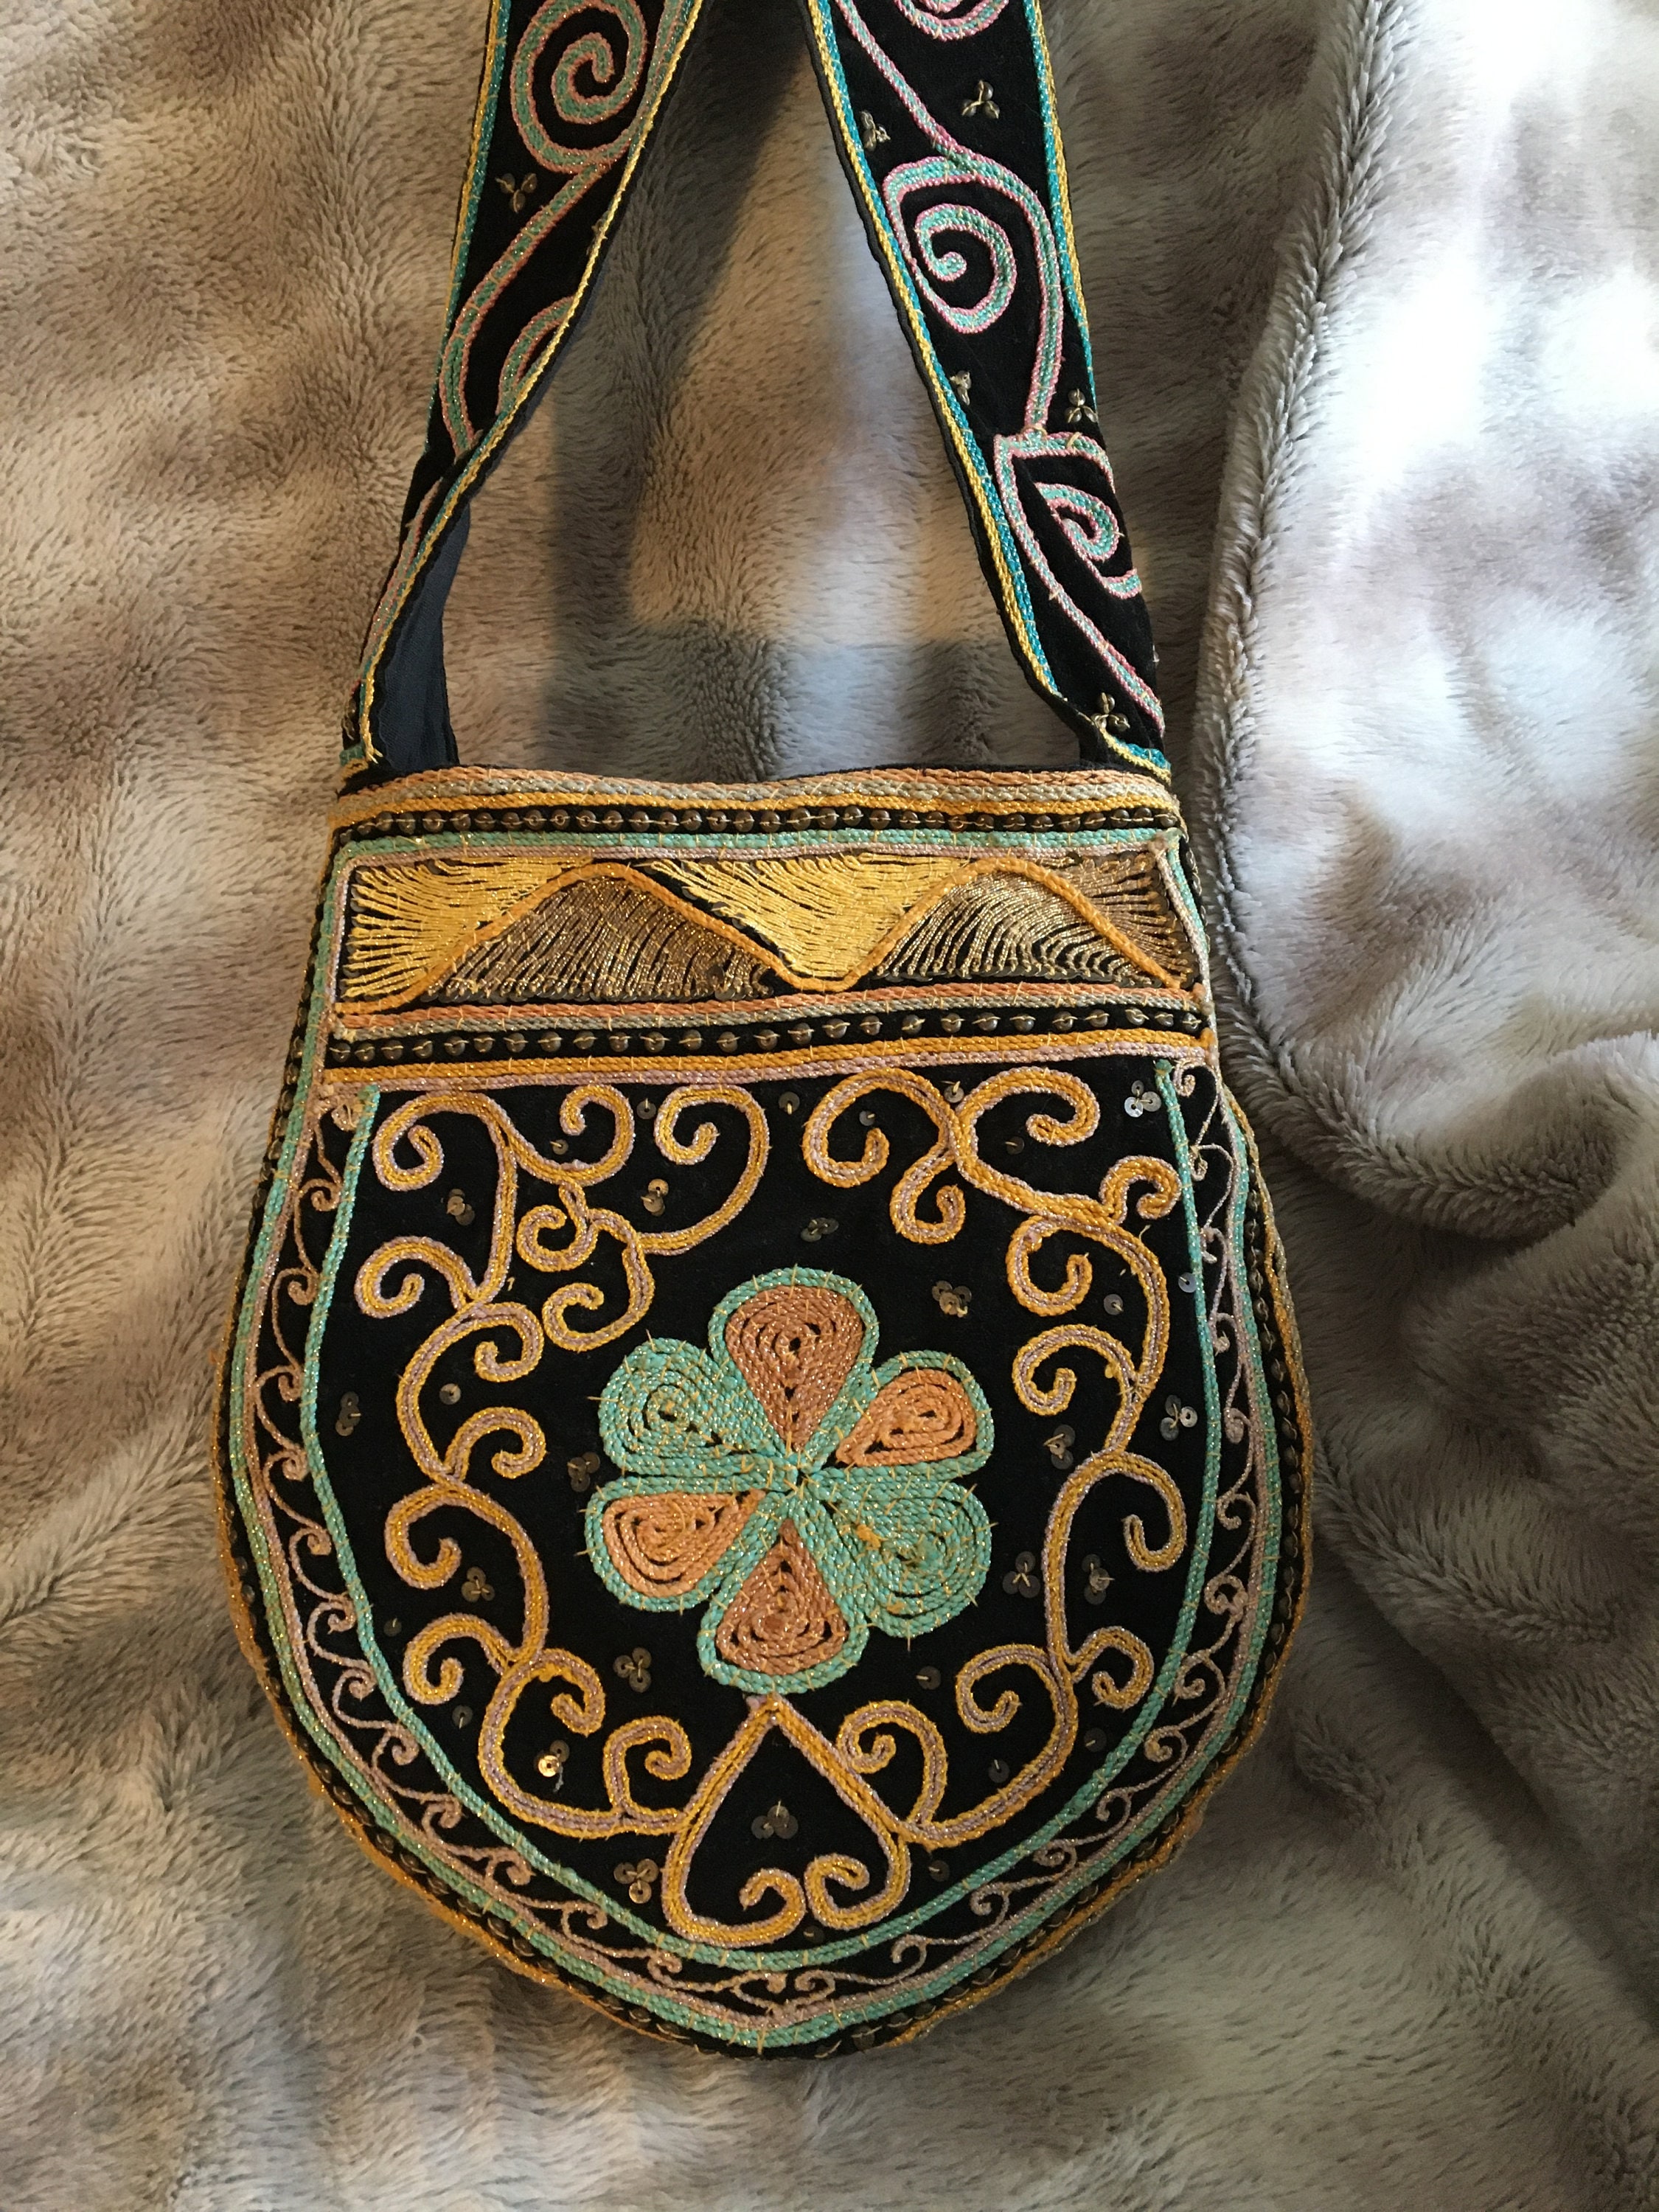 Vintage/Authentic Hippie Cross-body purse (Gypsy Banjara bag) from the &#39;60s